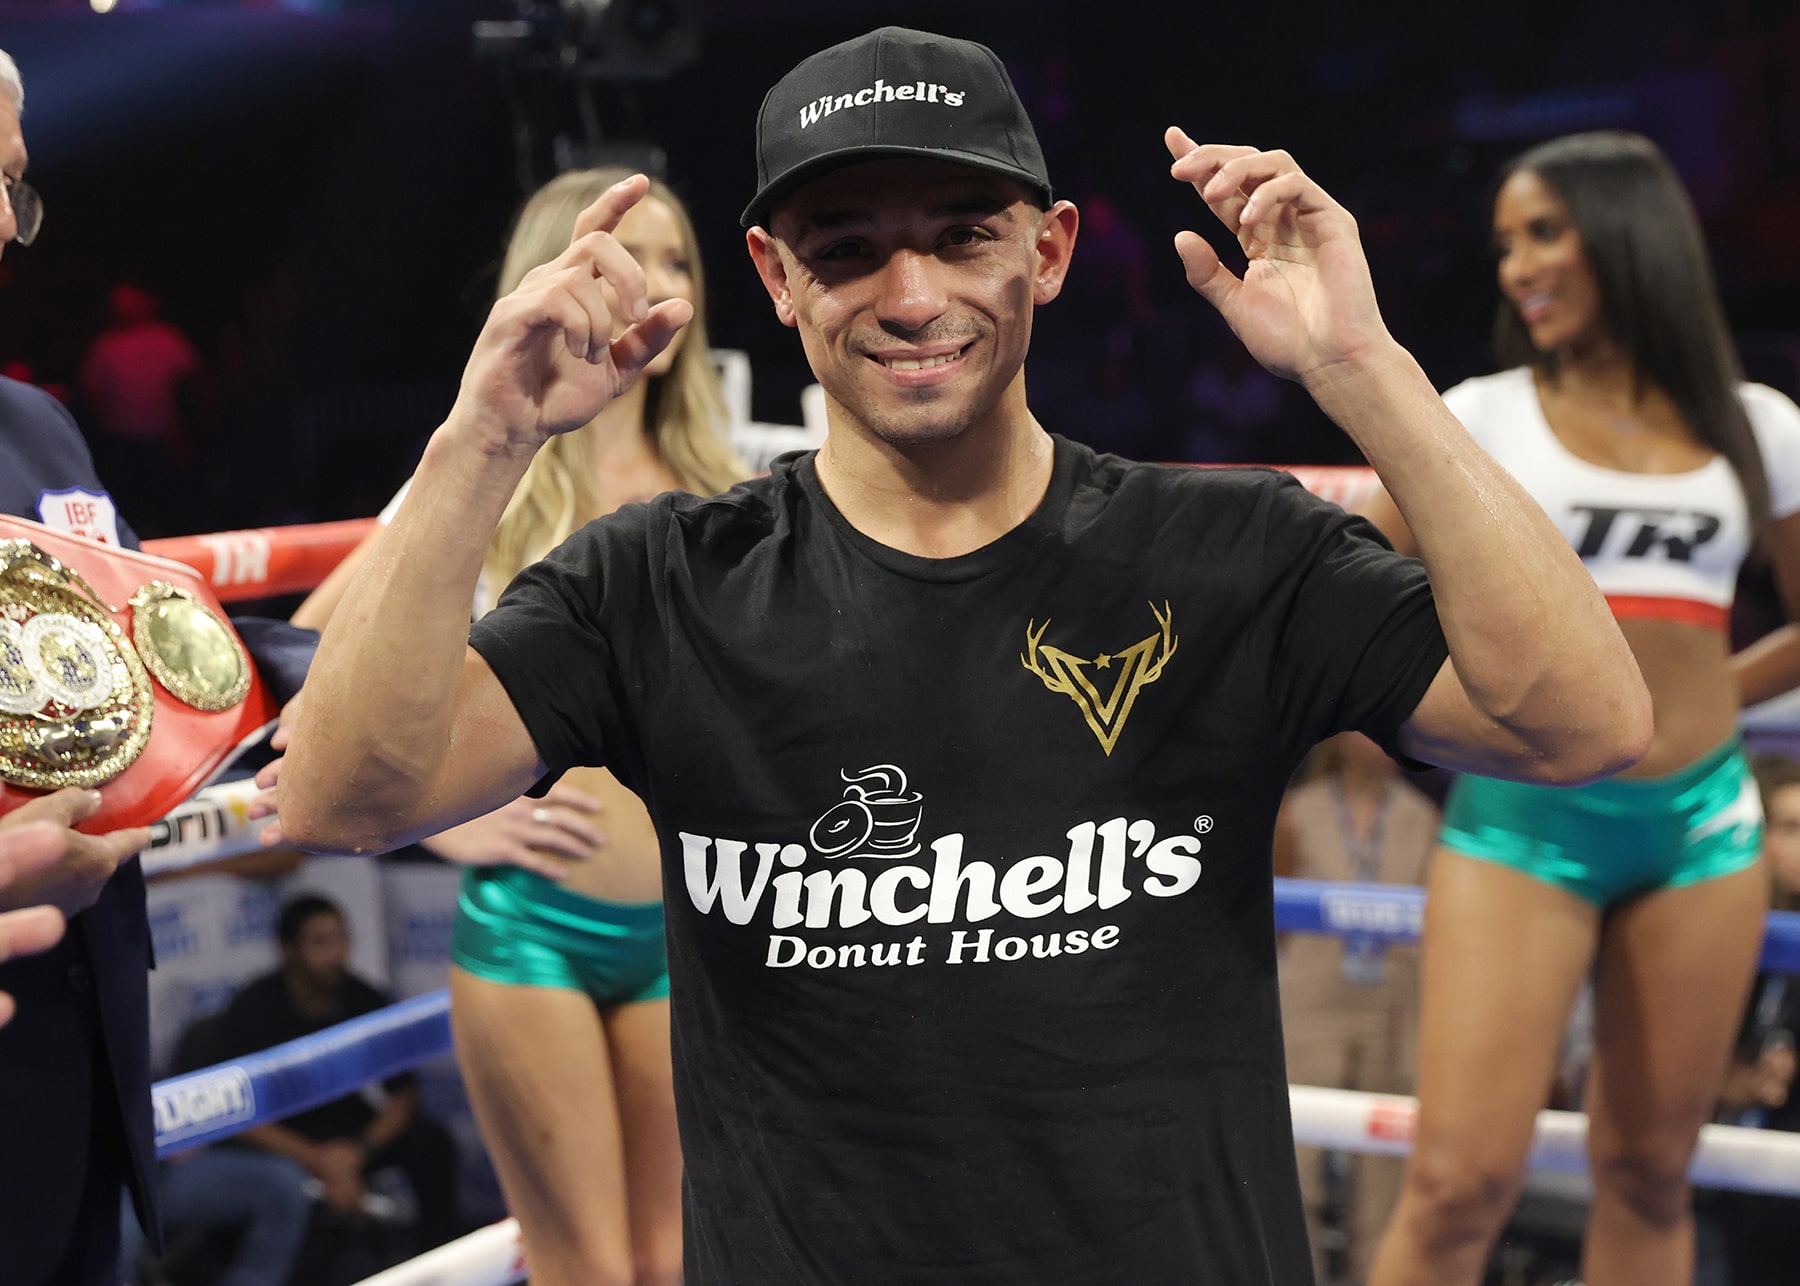 Lopez targeting unifications following win over Gonzalez